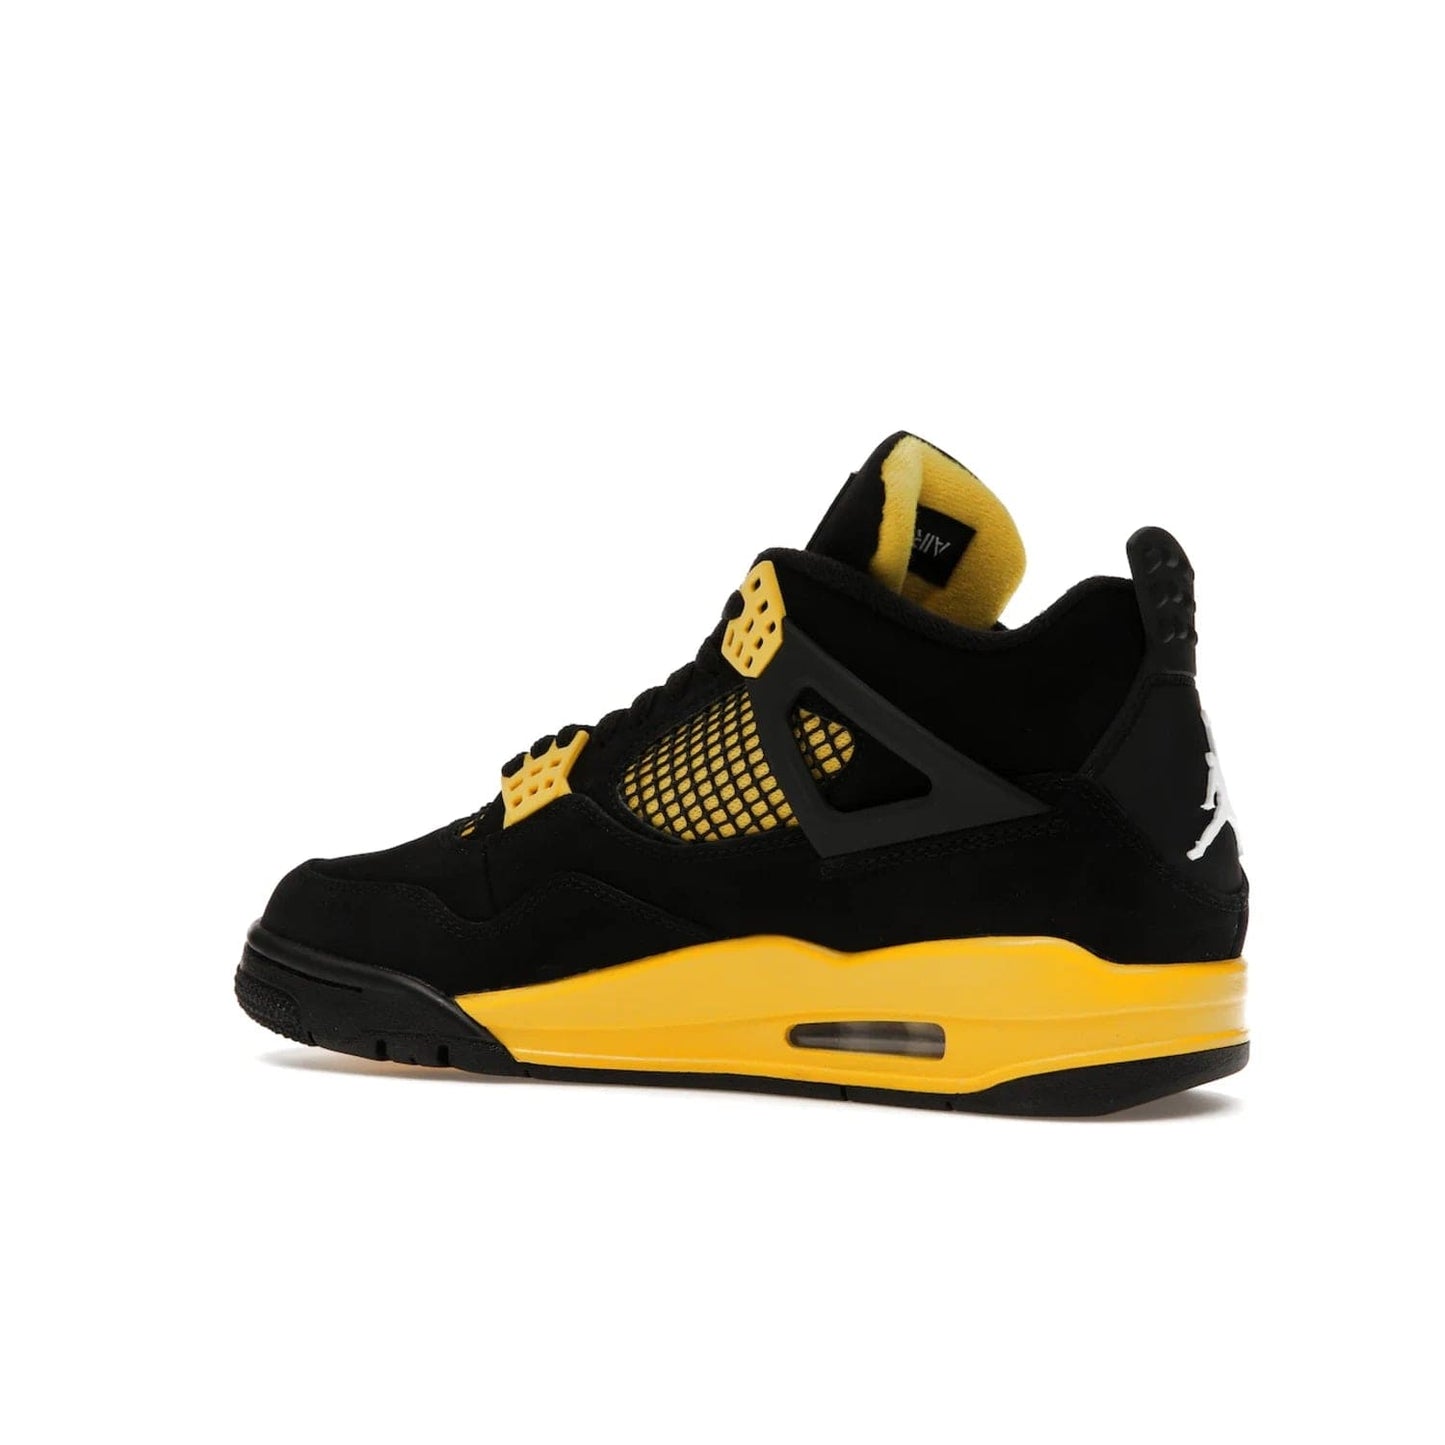 Jordan 4 Retro Thunder (2023) - Image 22 - Only at www.BallersClubKickz.com - Iconic Air Jordan 4 Retro Thunder (2023) returns with black nubuck upper and Tour Yellow details. Featuring Jumpman logo on heel tab, tongue and insoles. Dropping May 13th, 2023.